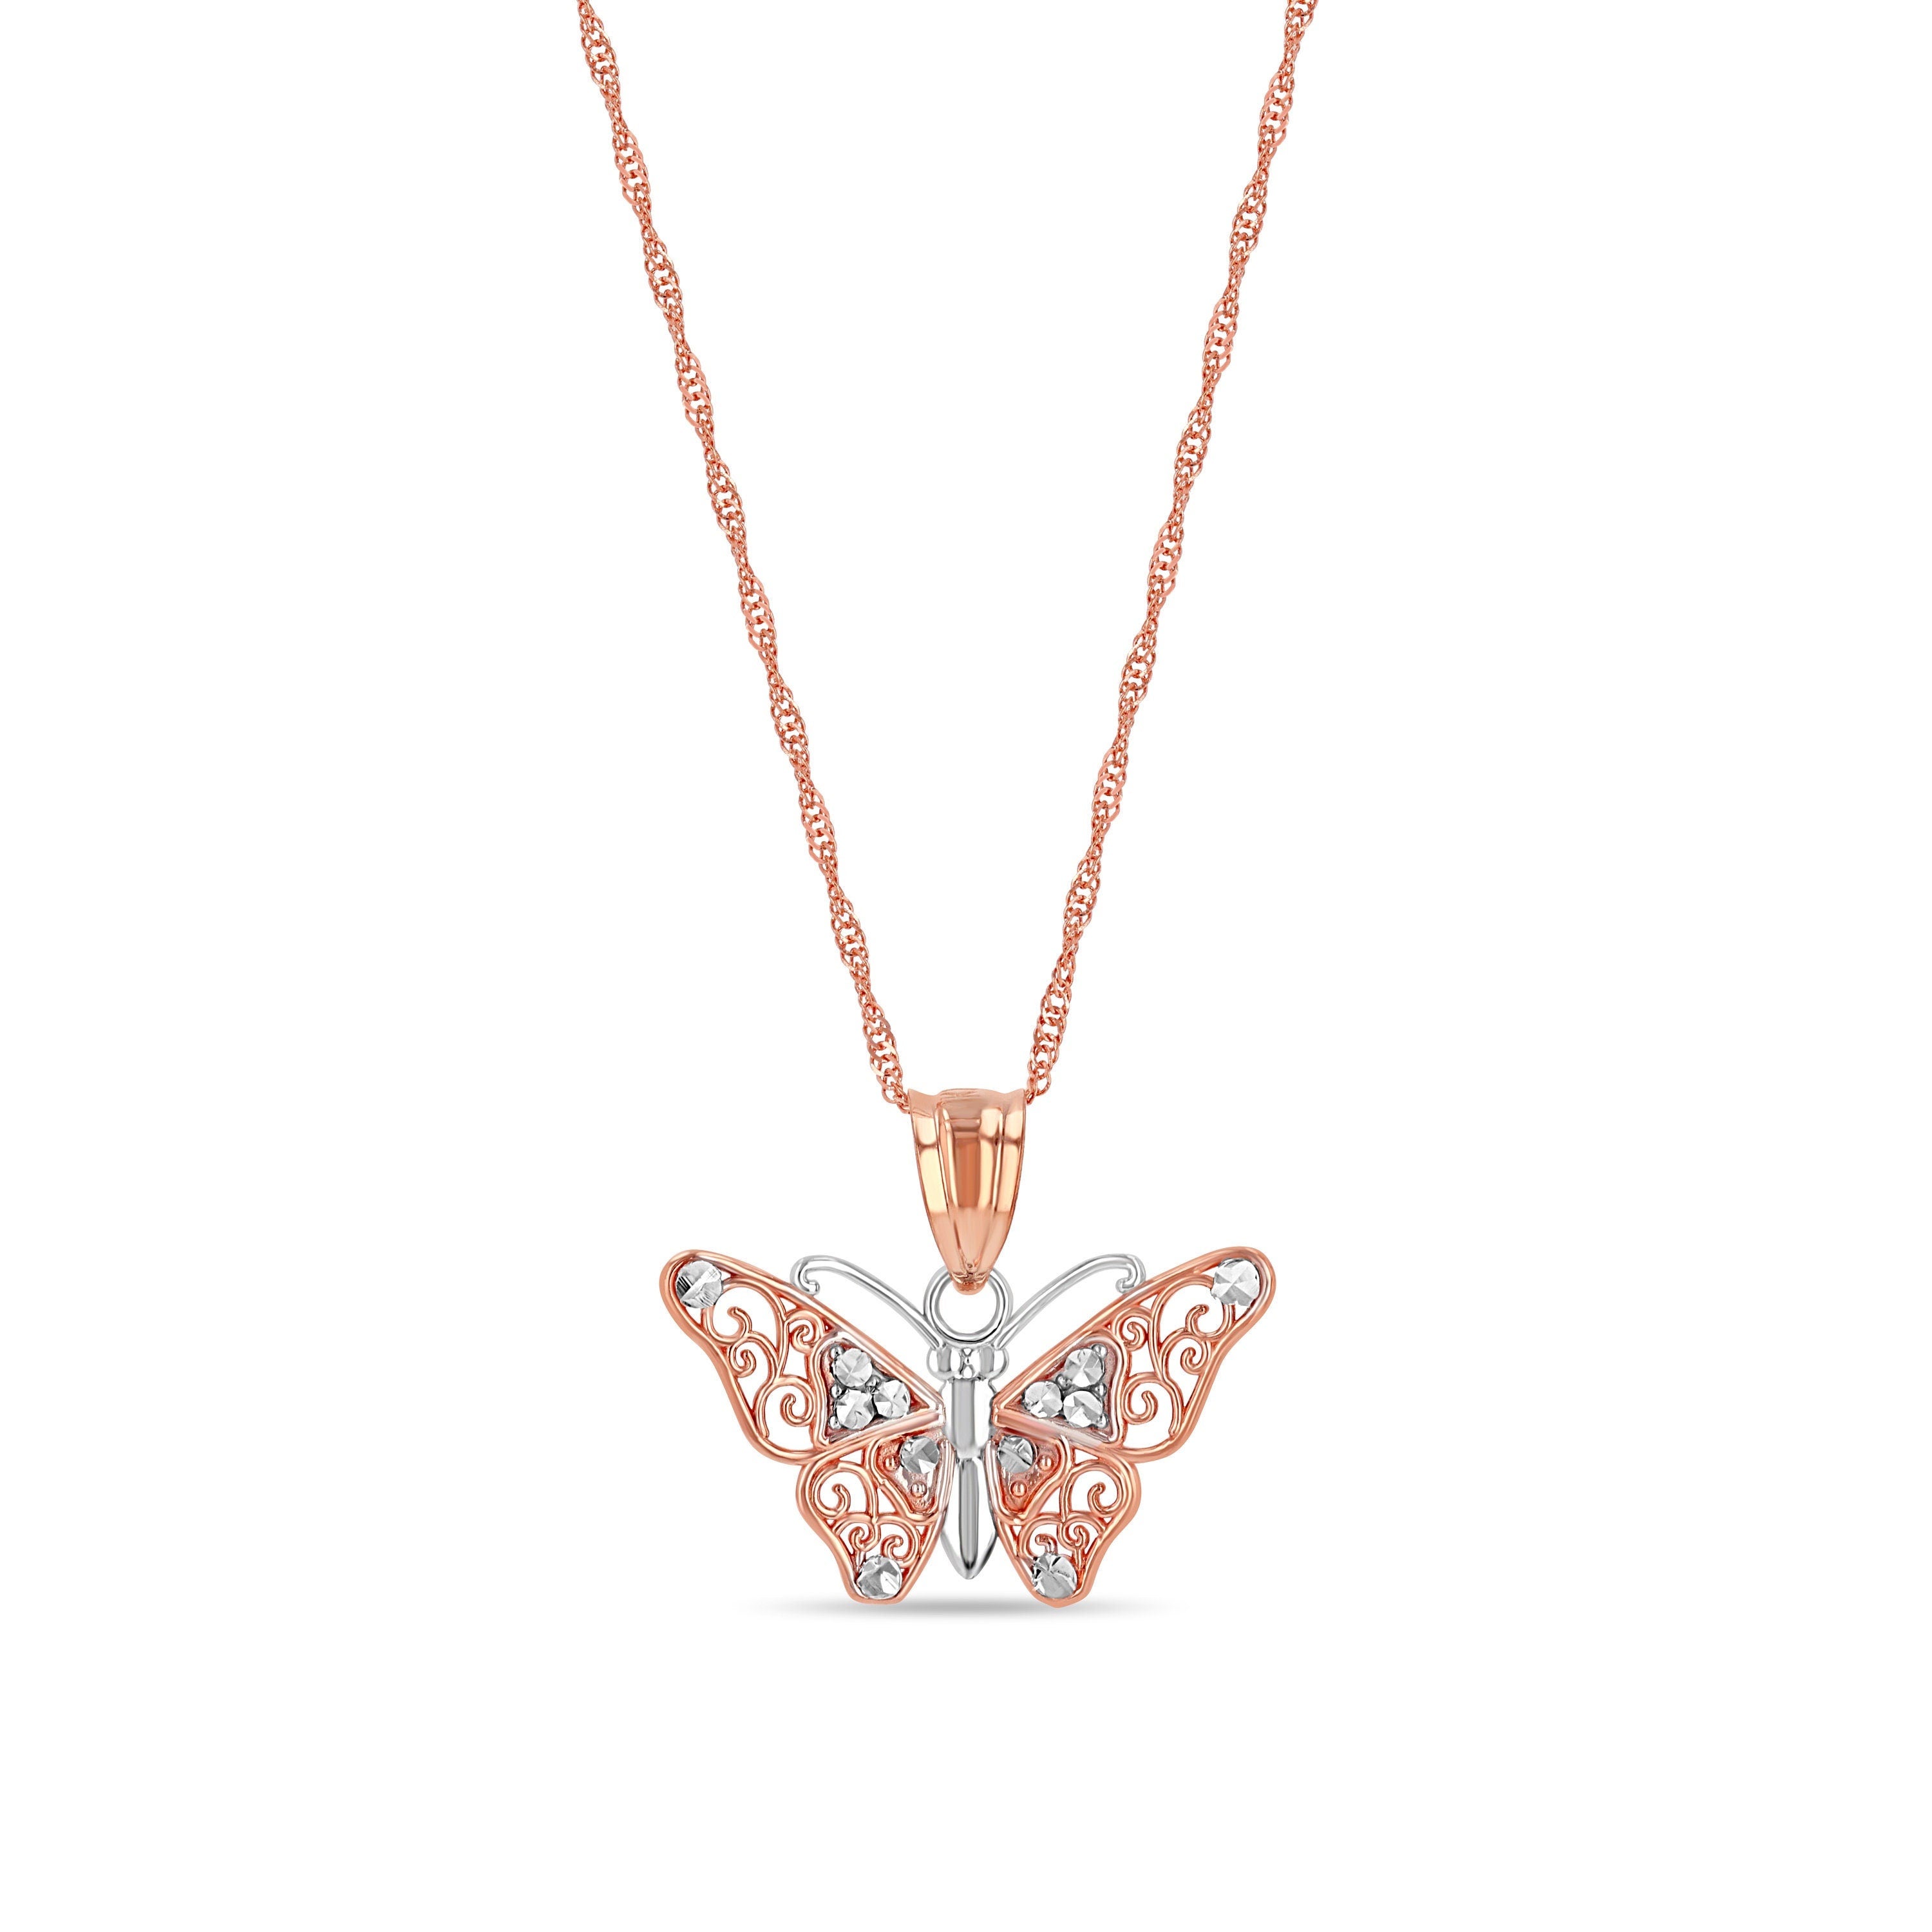 14k solid gold two tone butterfly pendant on 18" solid 14k Rose gold chain